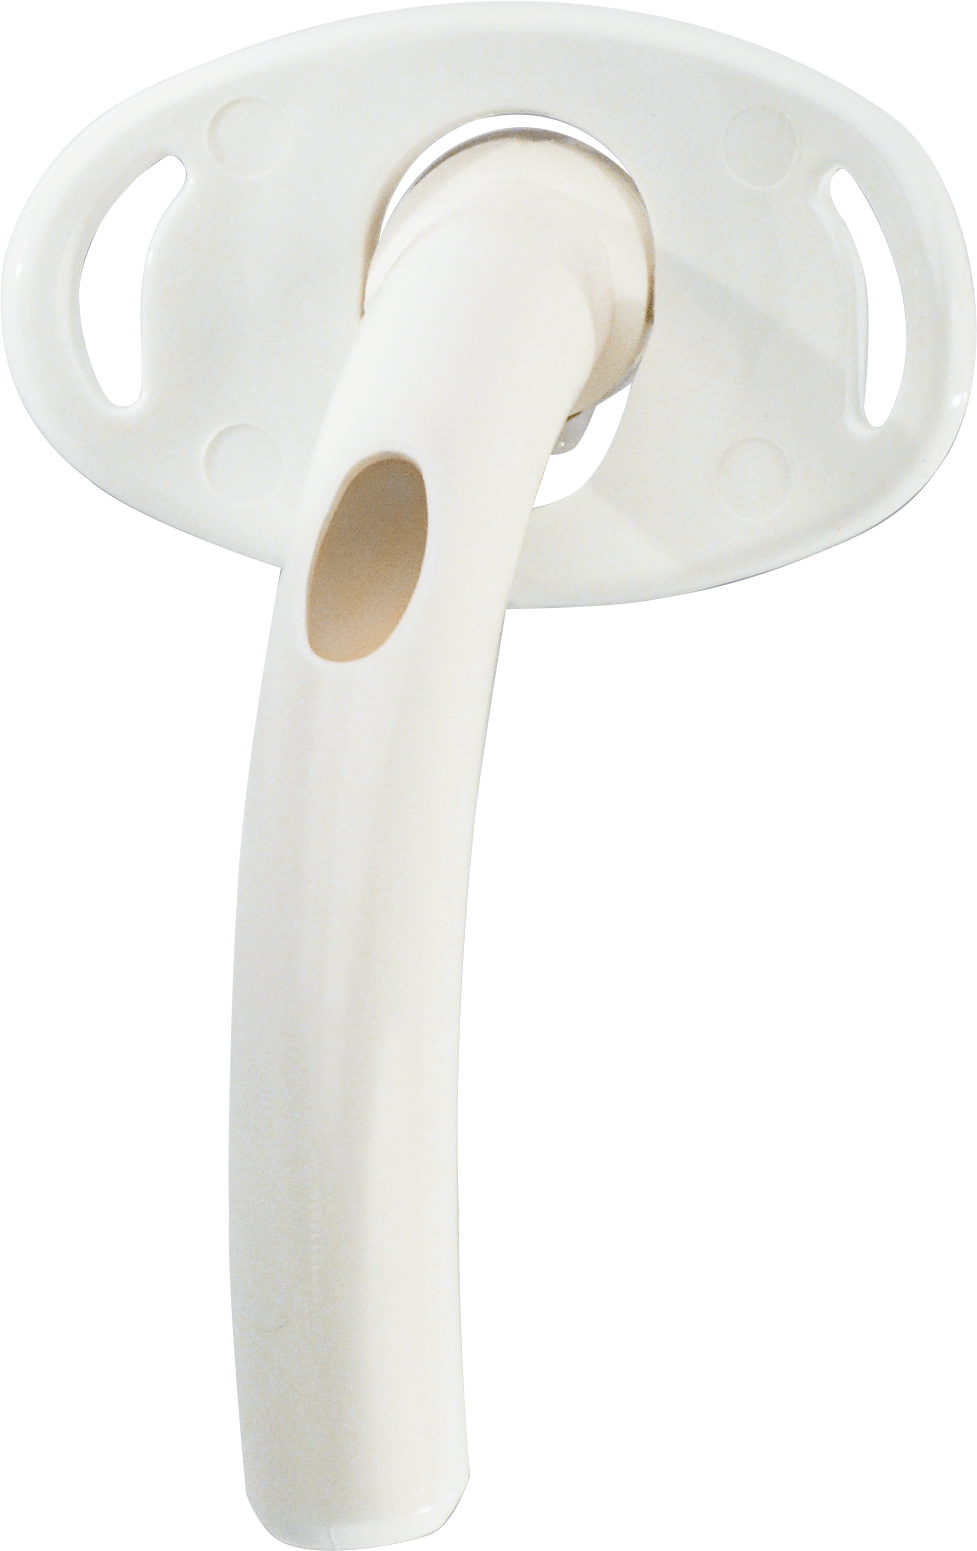 EA/1 - Mallinckrodt Medical Inc Shiley&trade; Fenestrated Reusable Cannula Cuffless Tracheostomy Tube 4 Size 65mm L, 5mm I.D. x 9-2/5mm O.D., Designed for General Pulmonary Hygiene - Best Buy Medical Supplies